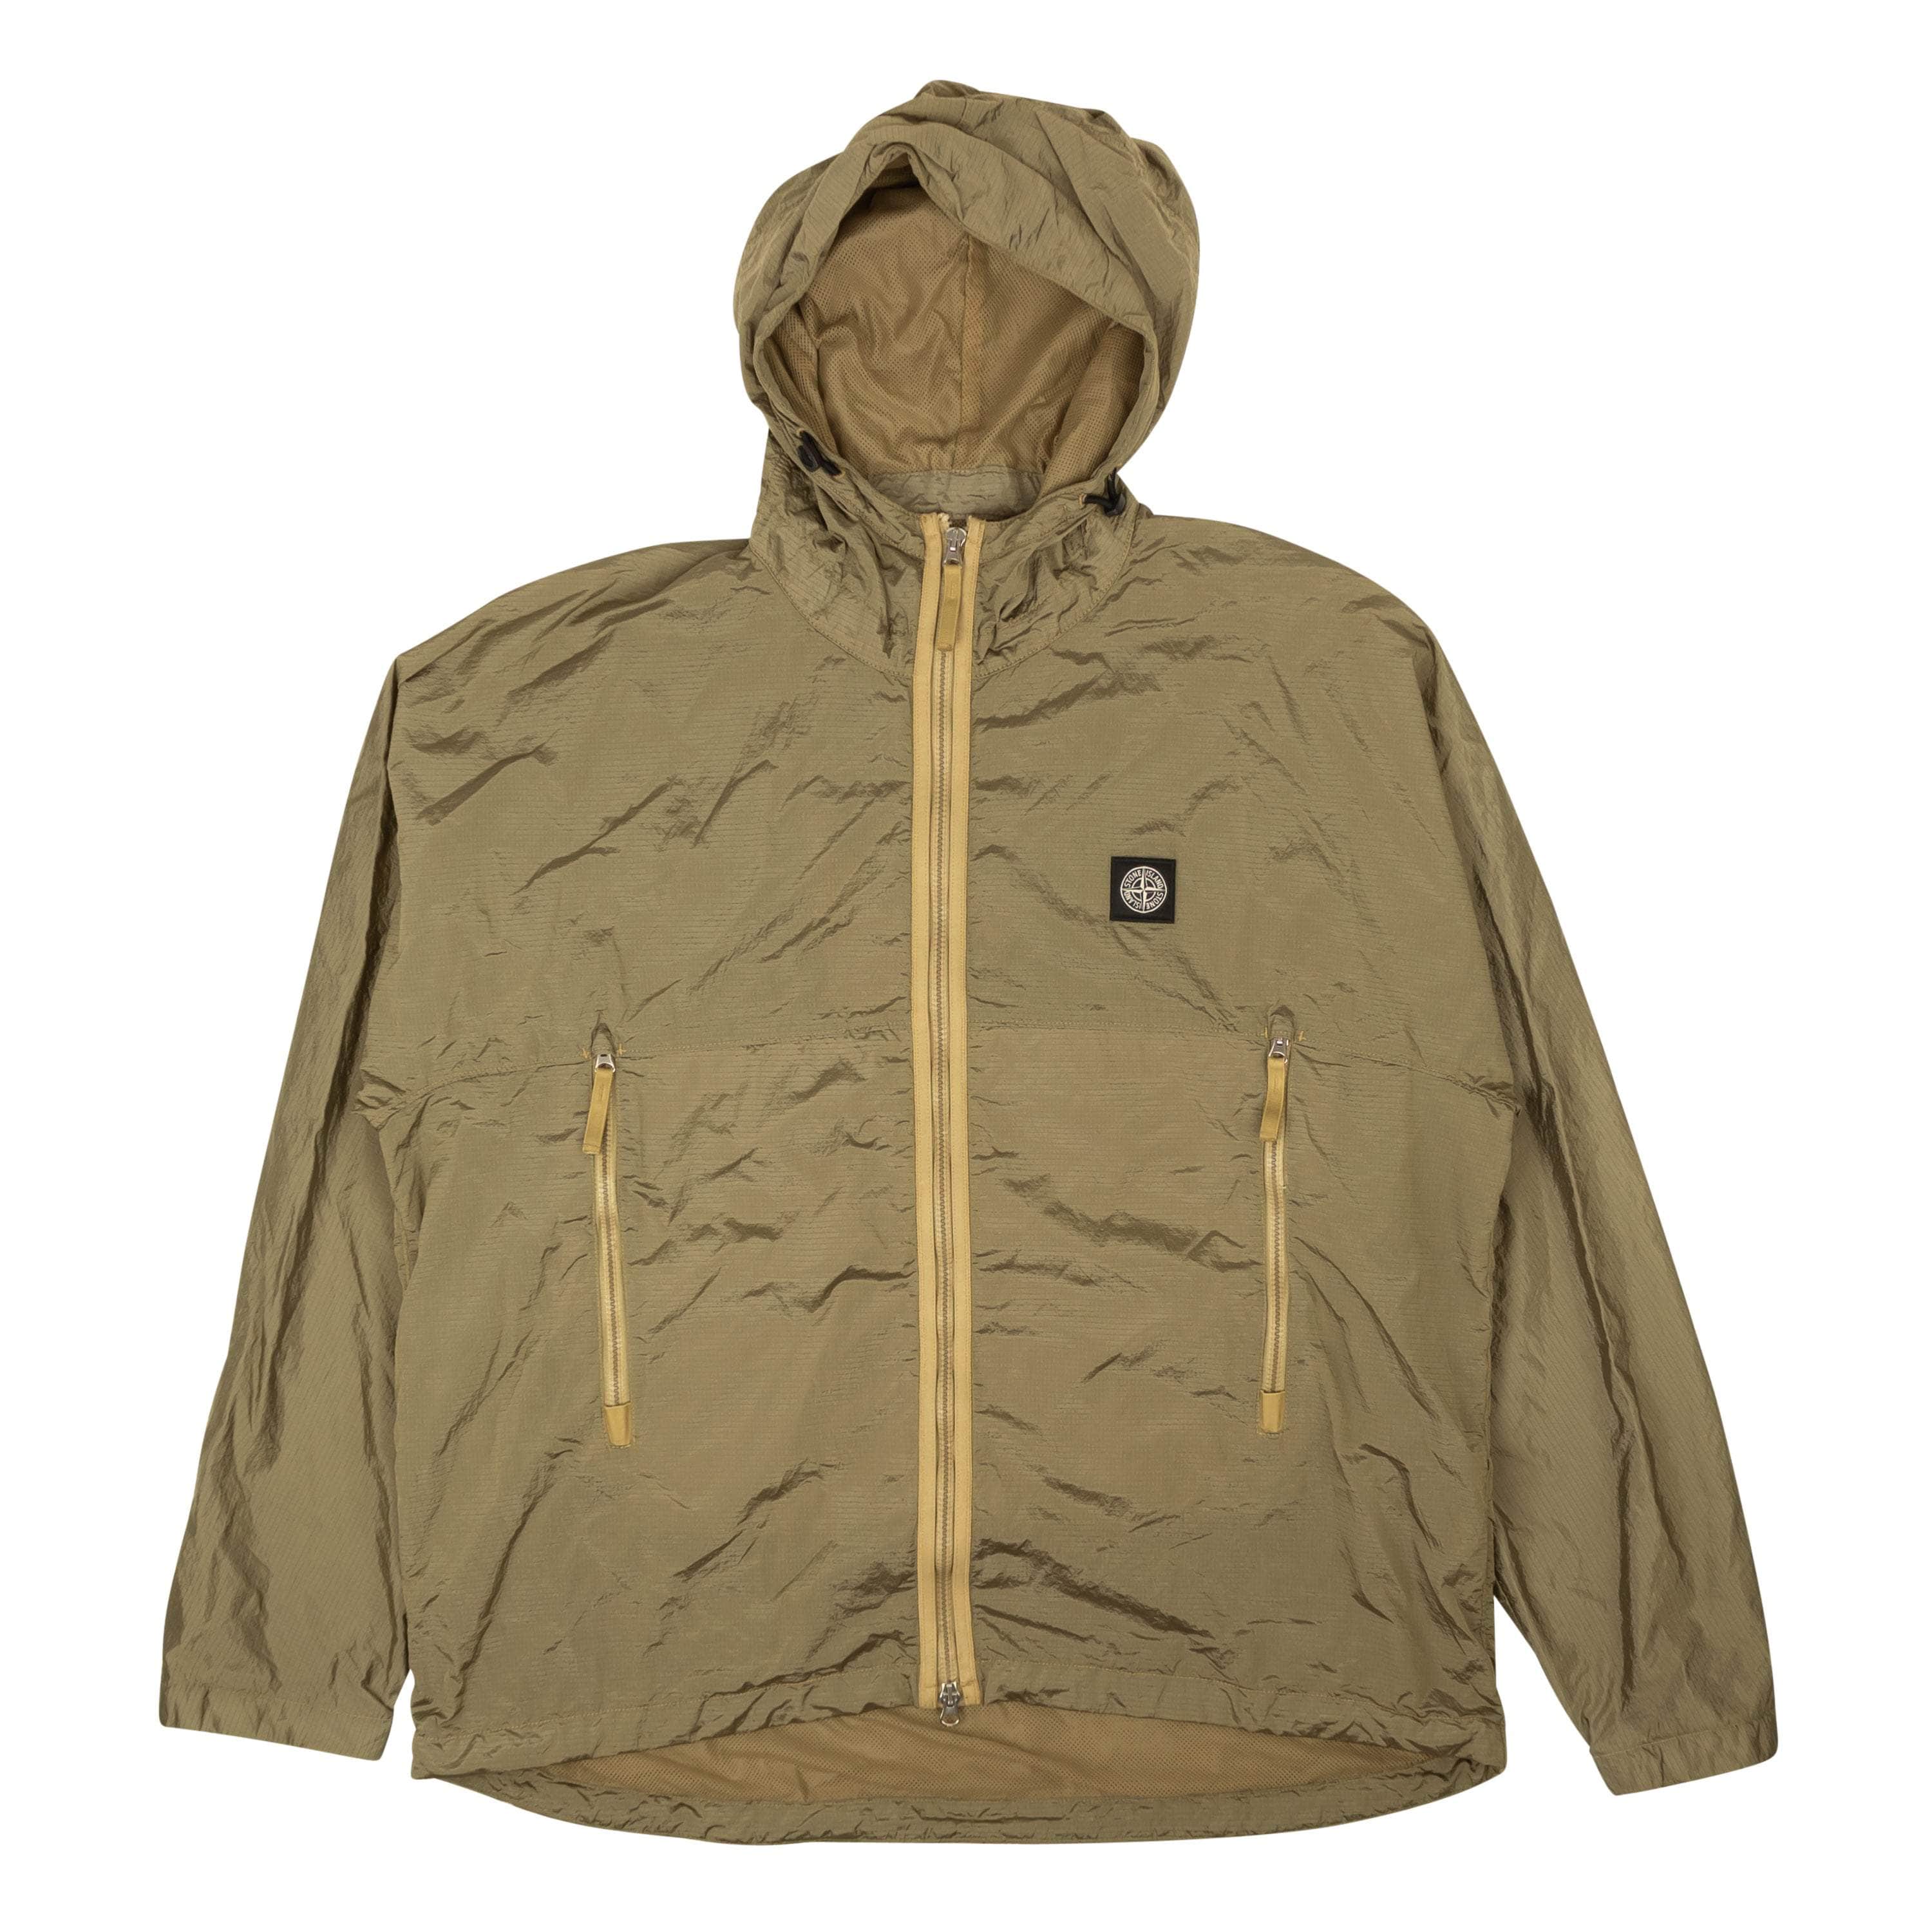 Stone Island 500-750, channelenable-all, chicmi, couponcollection, gender-mens, main-clothing, mens-raincoats, mens-shoes, size-l, size-m, size-s, size-xl, size-xxl, stone-island Light Olive Nylon Metal Watro Jacket